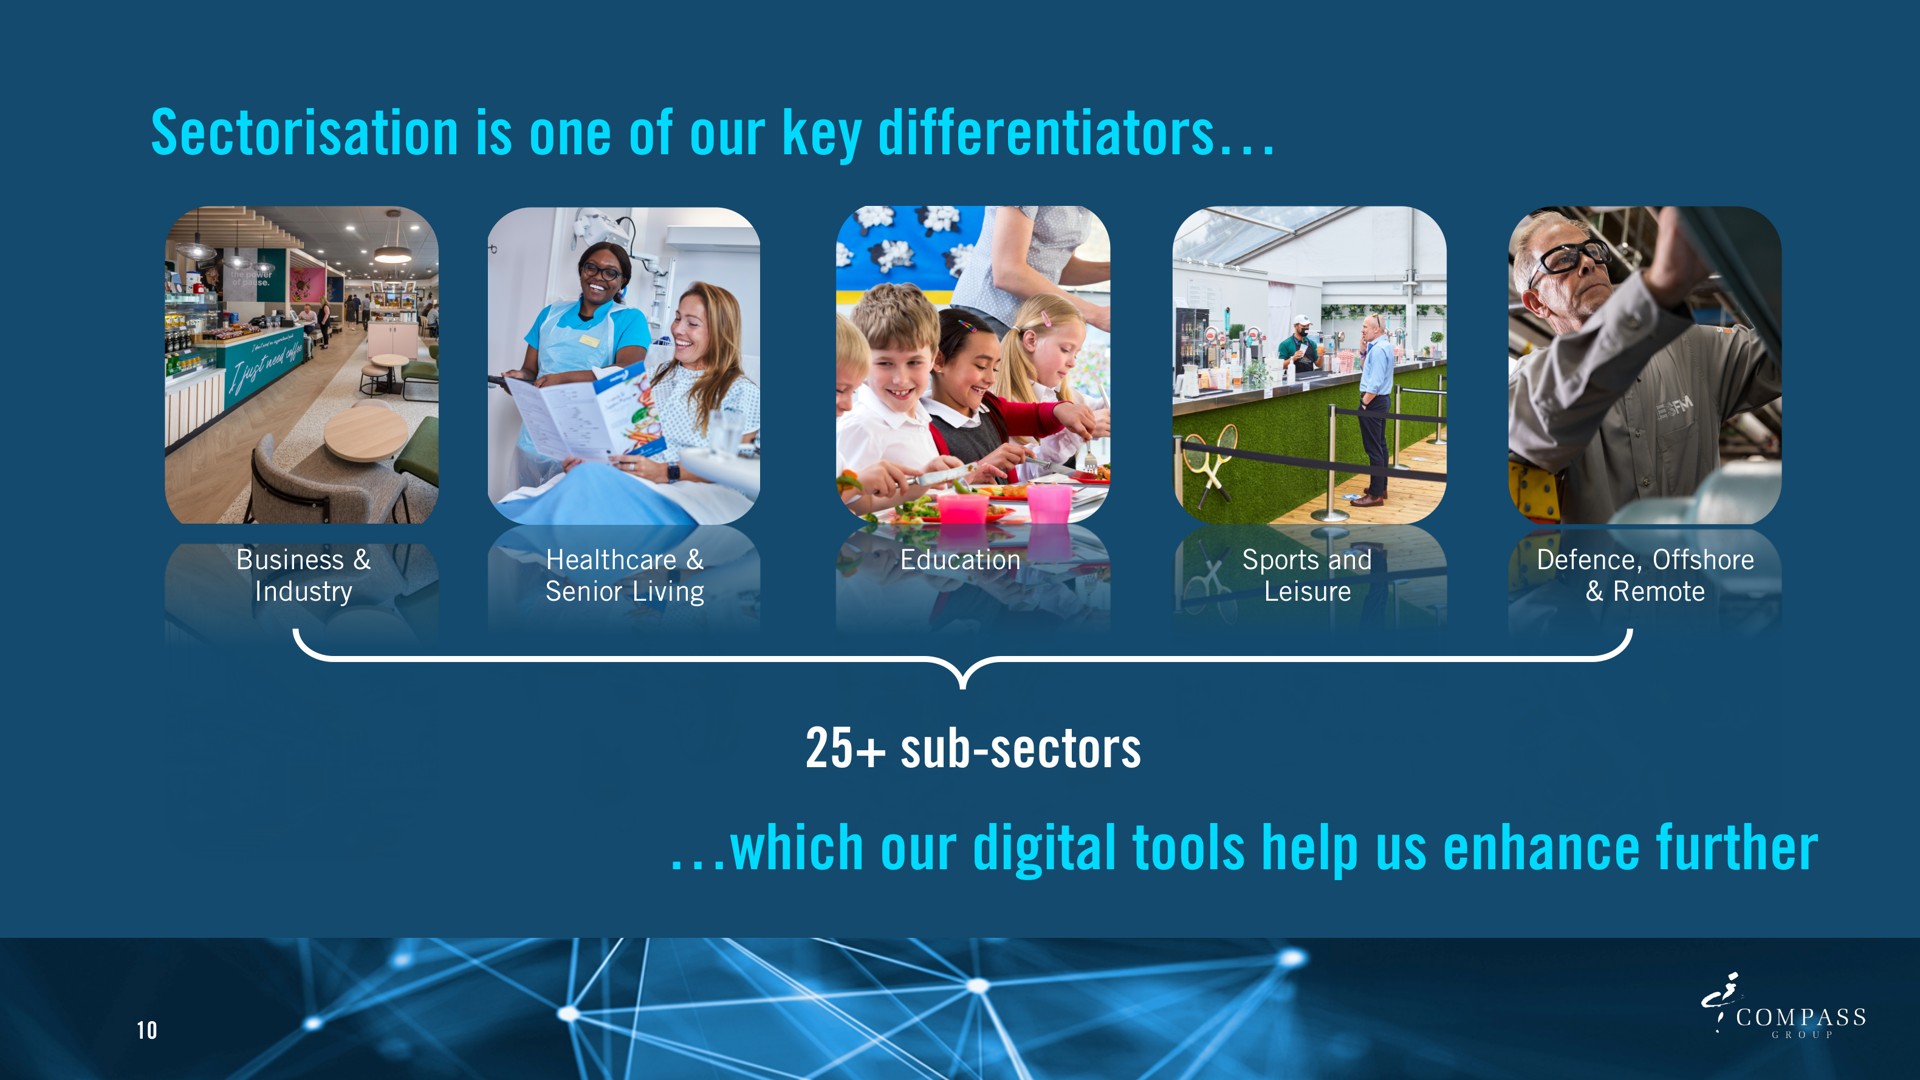 is one of our key differentiators sub sectors which our digital tools help us enhance further | Compass Group